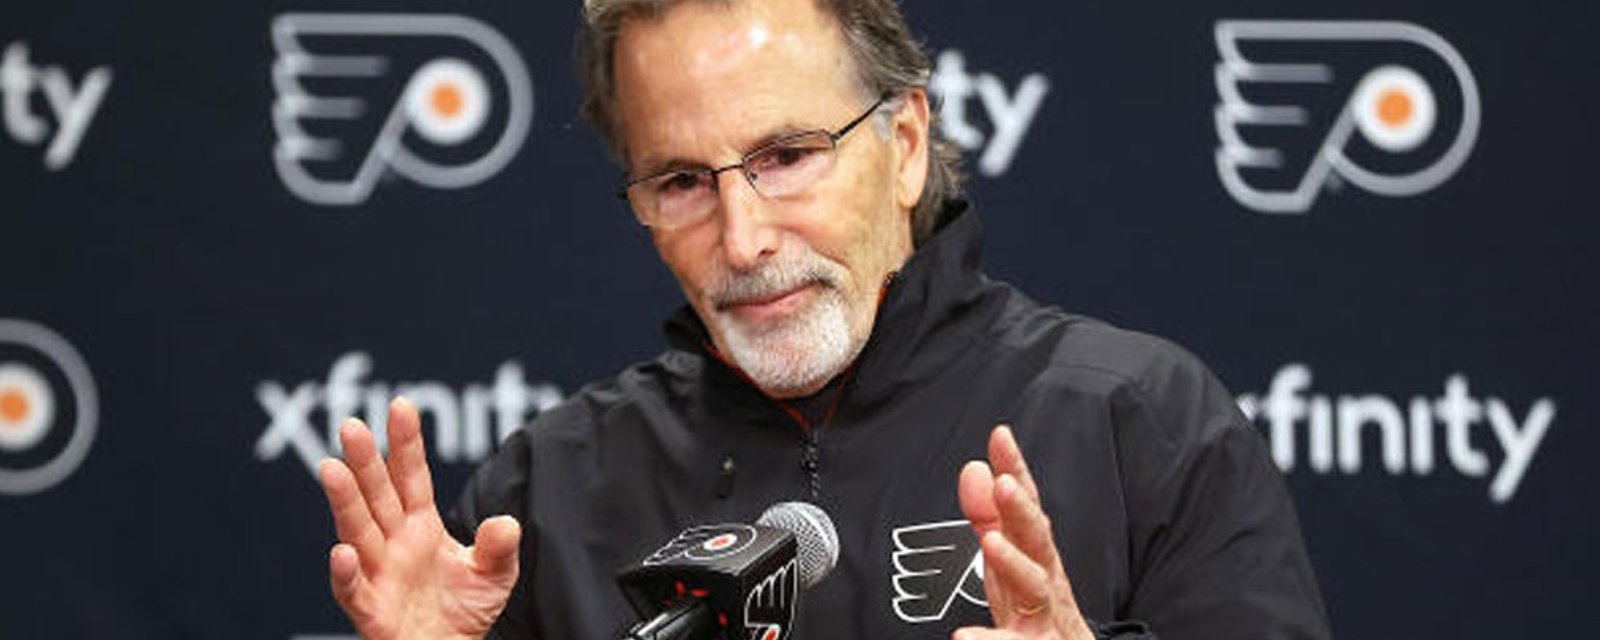 Surprising report out of Philly on head coach John Tortorella